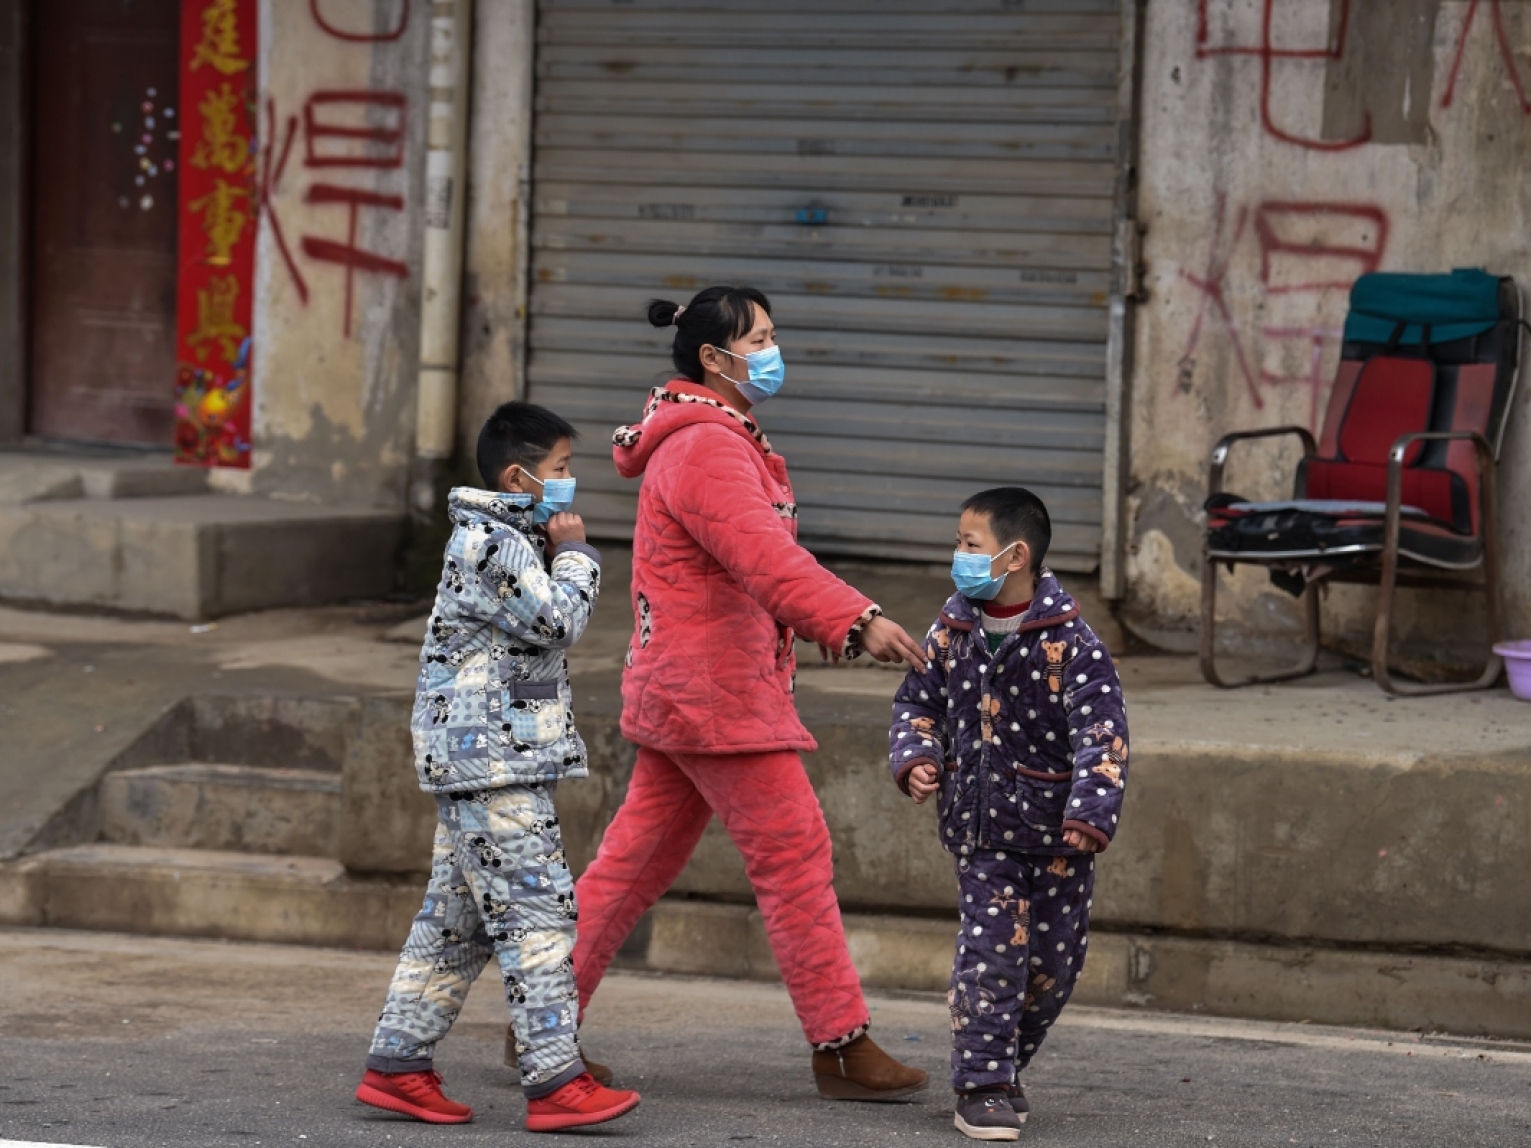 Residents of Wuhan, China wear protective masks to guard against the coronavirus.